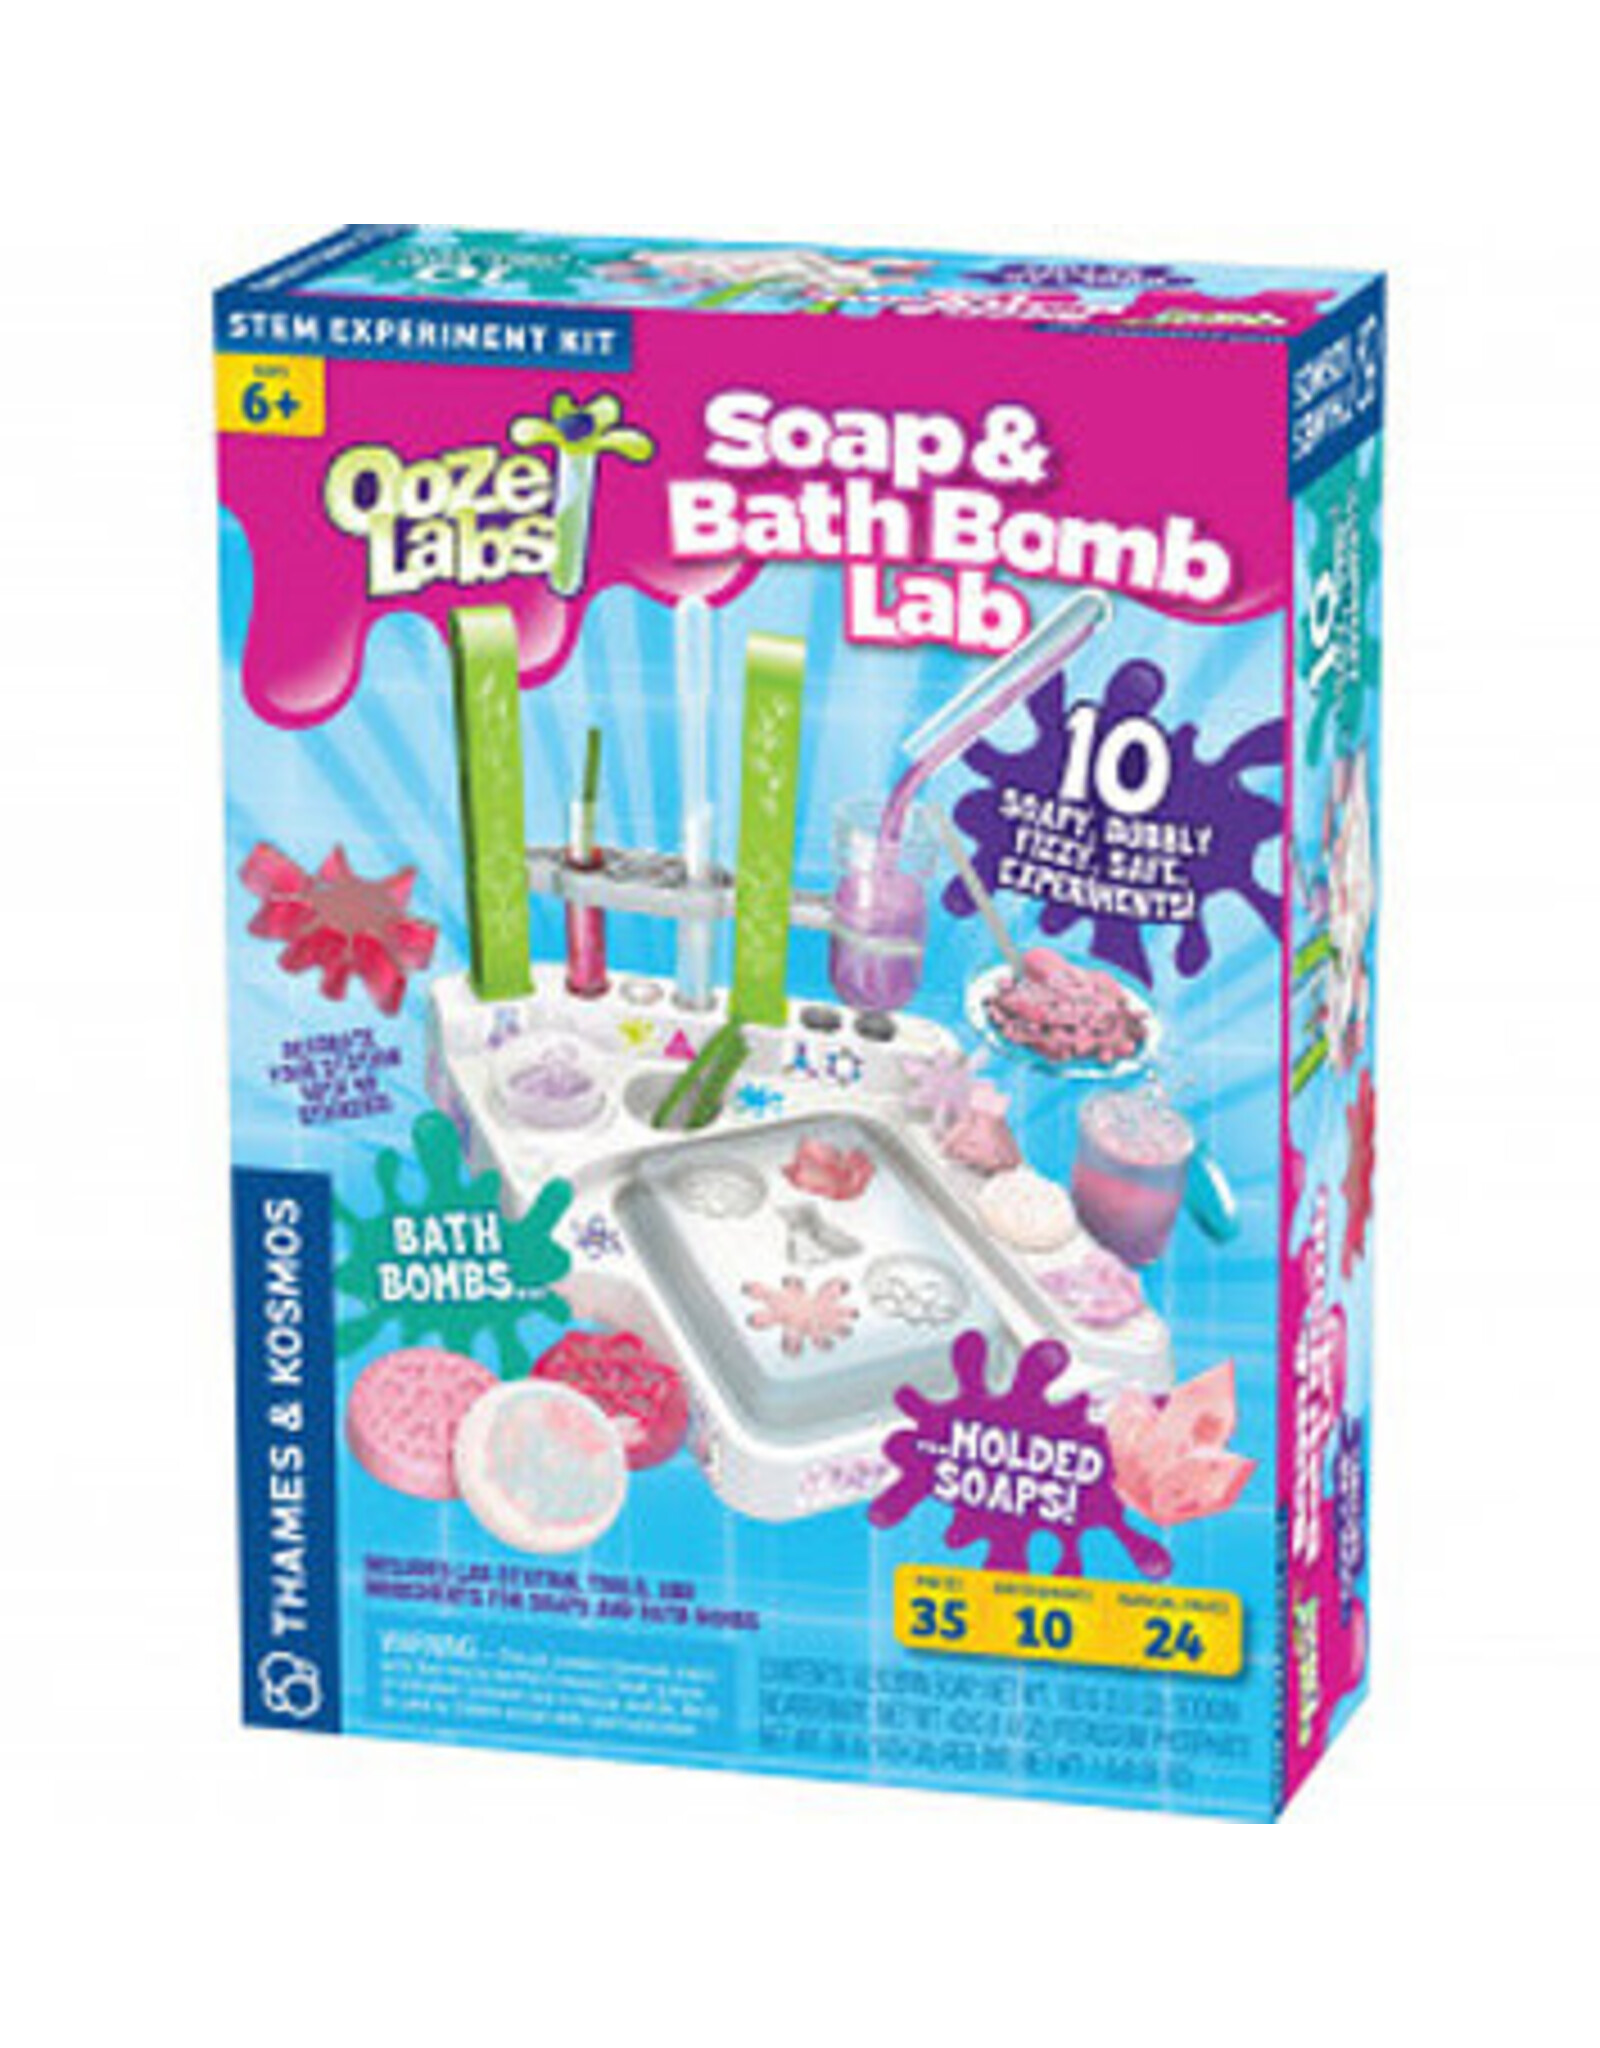 Ooze Labs Soap and Bath Bomb Lab